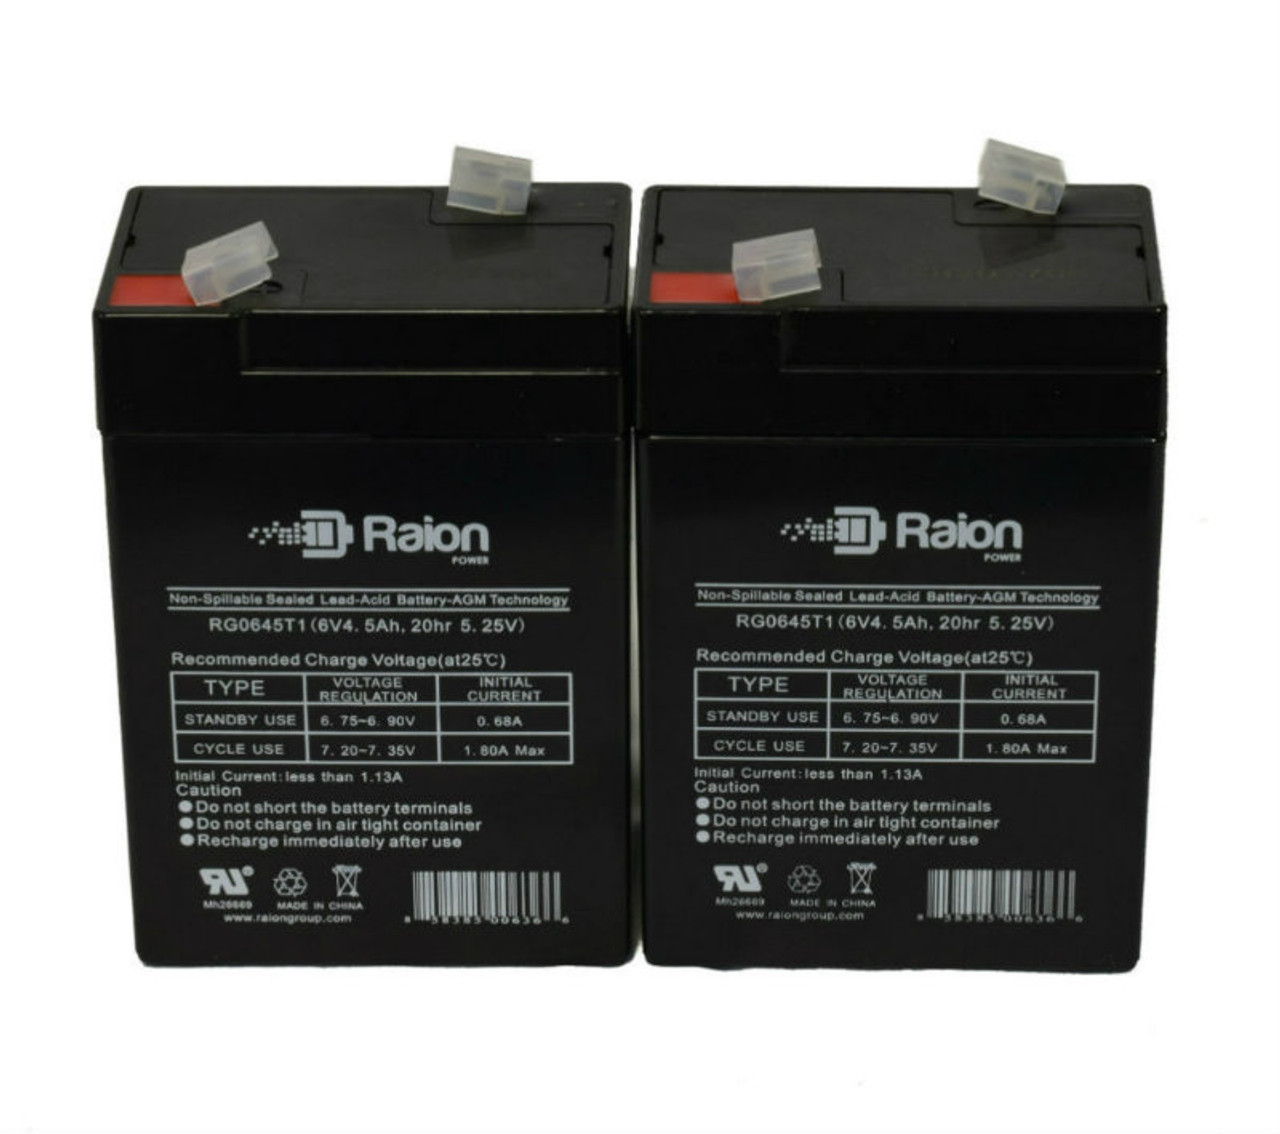 Raion Power 6 Volt 4.5Ah RG0645T1 Replacement Battery for Champion NP4-6 - 2 Pack